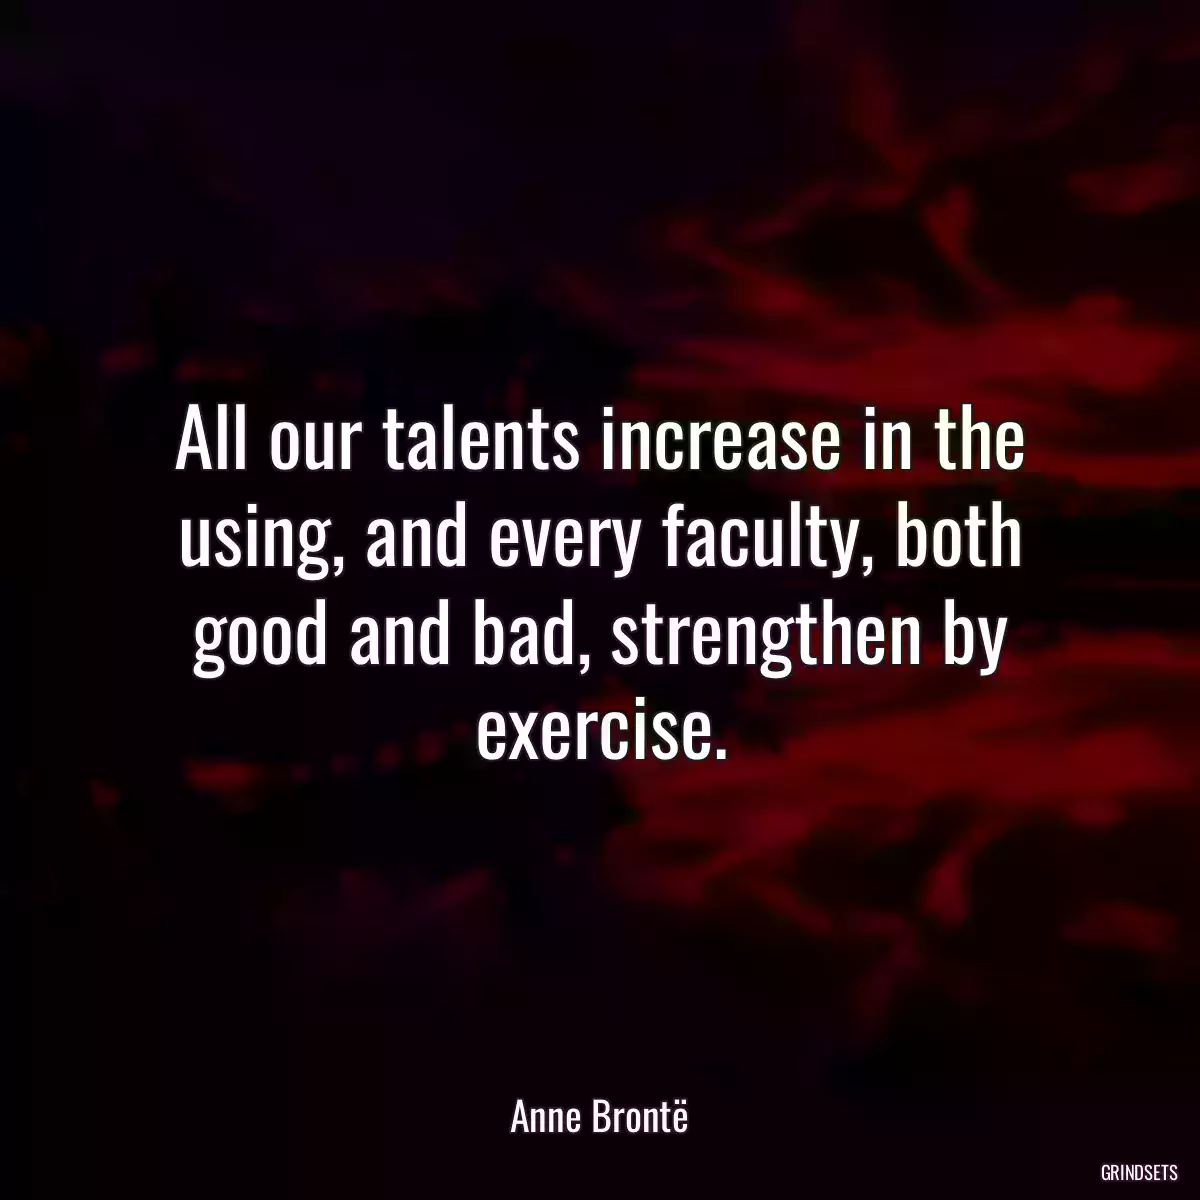 All our talents increase in the using, and every faculty, both good and bad, strengthen by exercise.